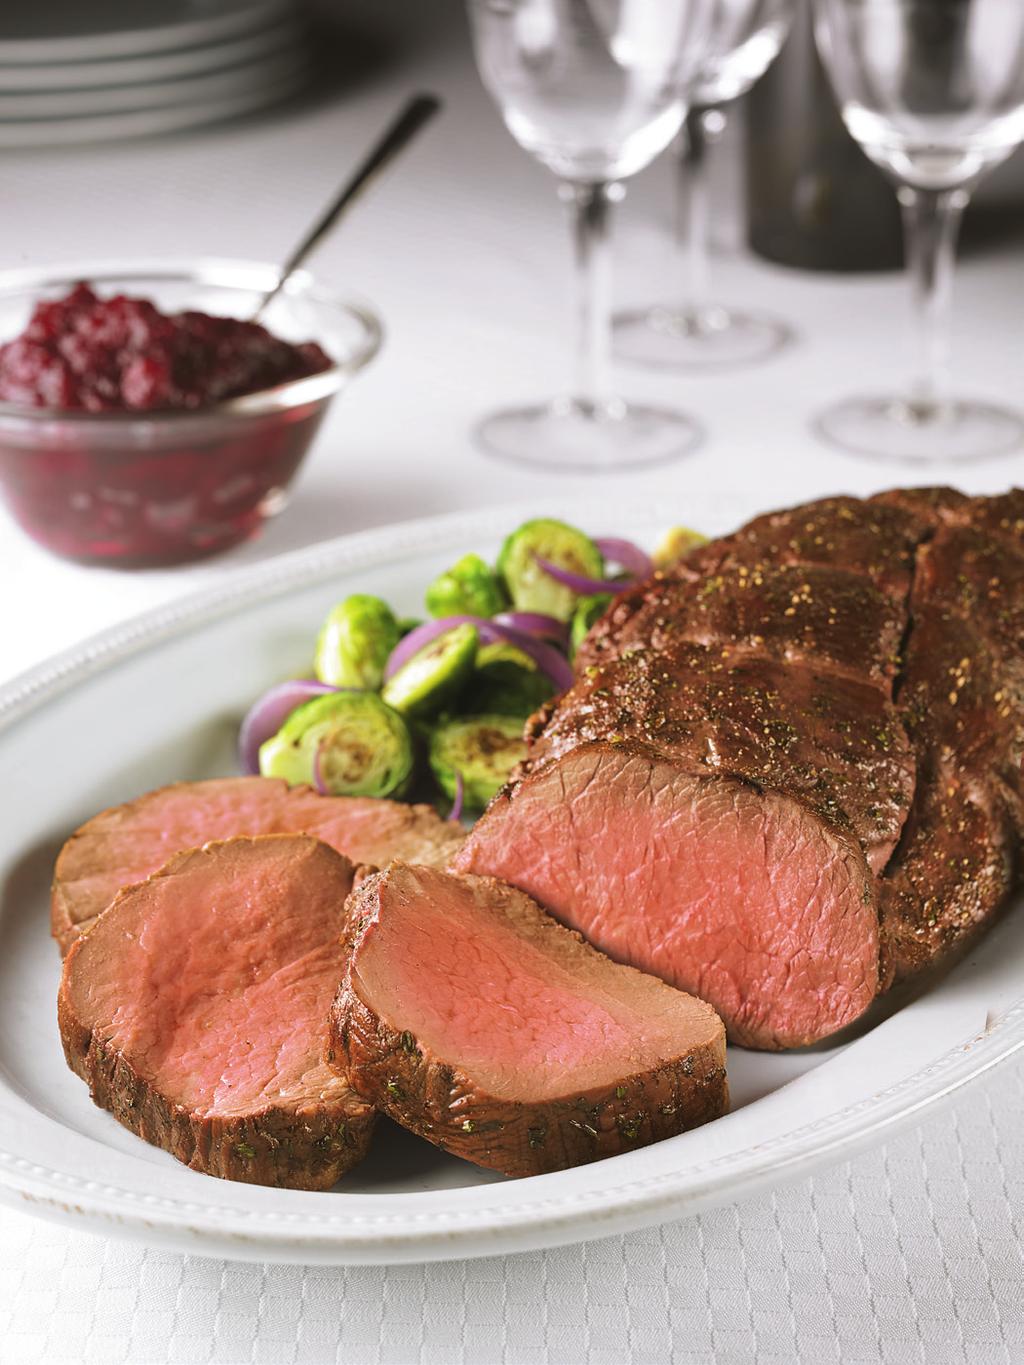 all natural beef Serving Size Servings: Calories: Ribeye Filets Chateaubriand 4 oz. (112g) 28 NY Strip 4 oz. (112g) 26 7g 95mg 9mg Total Carb. Sat. Fat Trans.